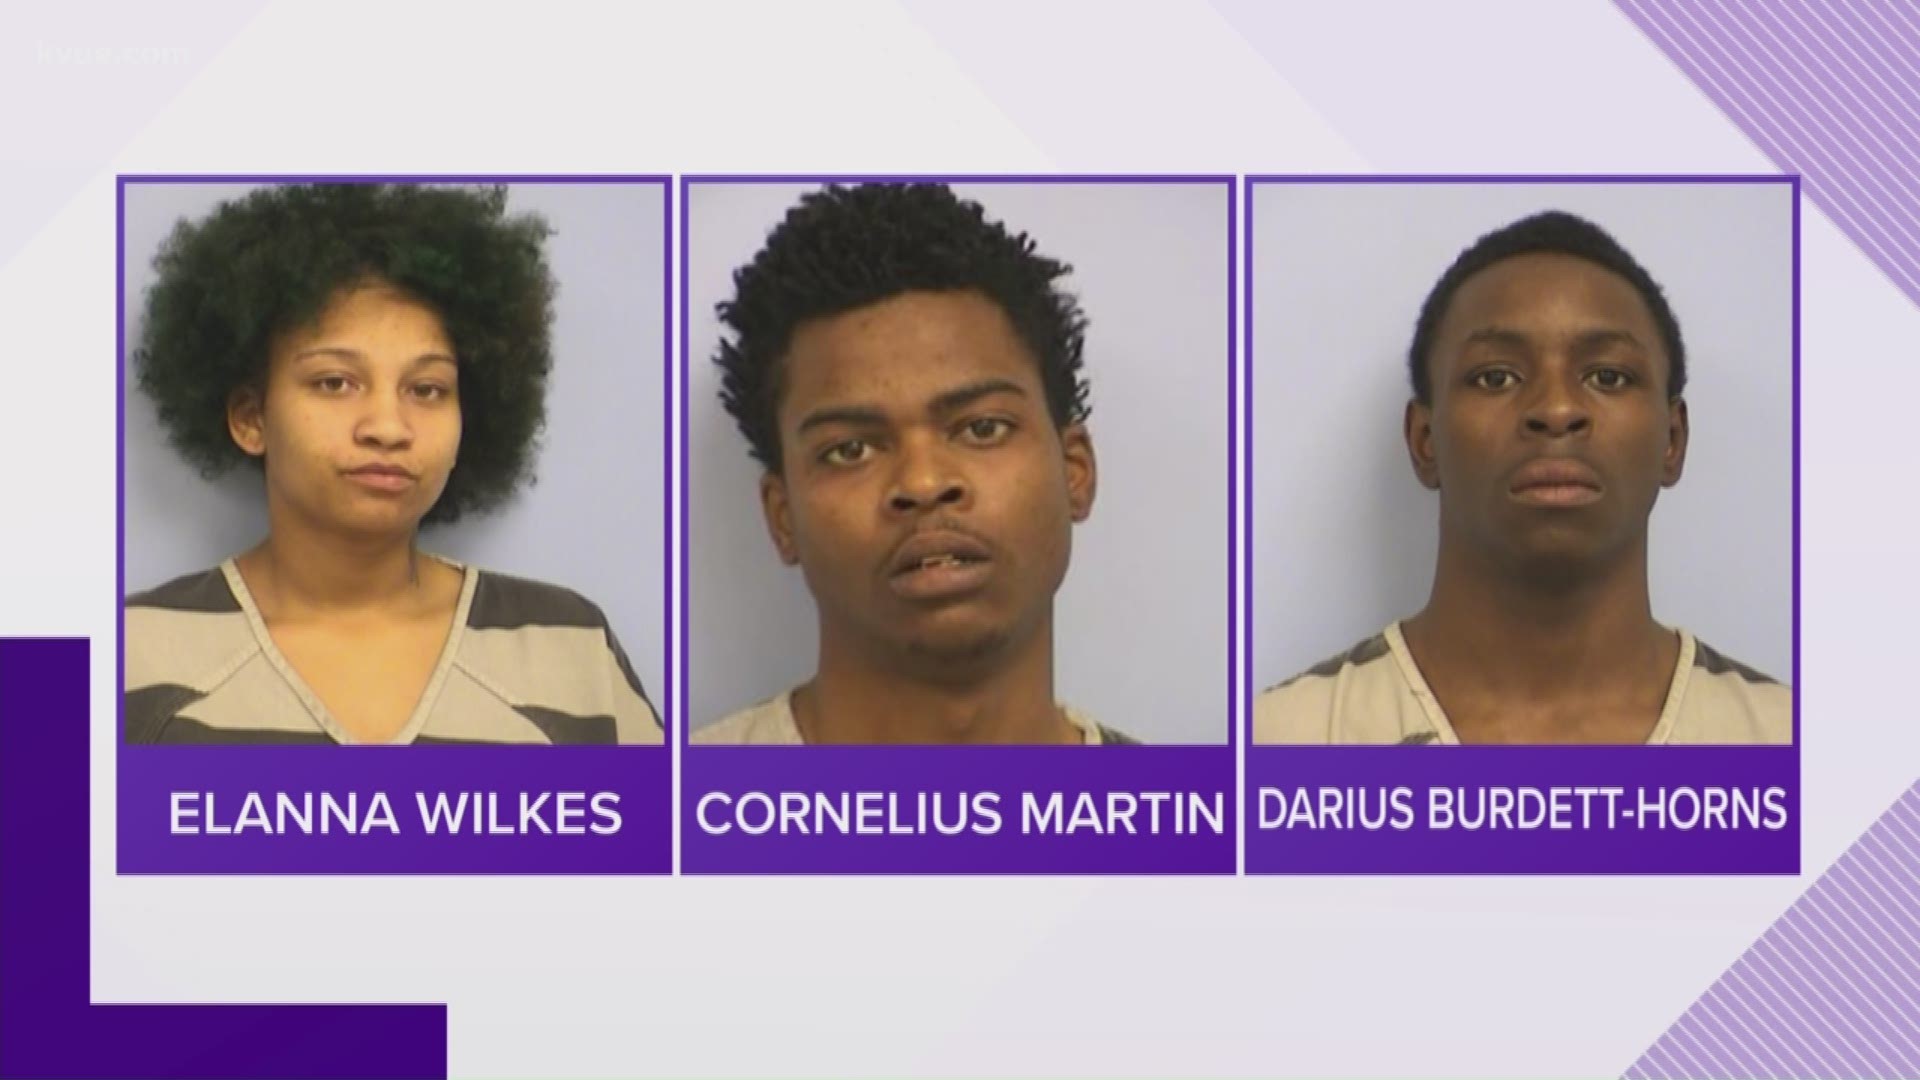 Three people -- Elanna Wilkes, Cornelius Martin and Darius Burdett-Hornsby -- have been arrested for the murder of an Air Force service member.